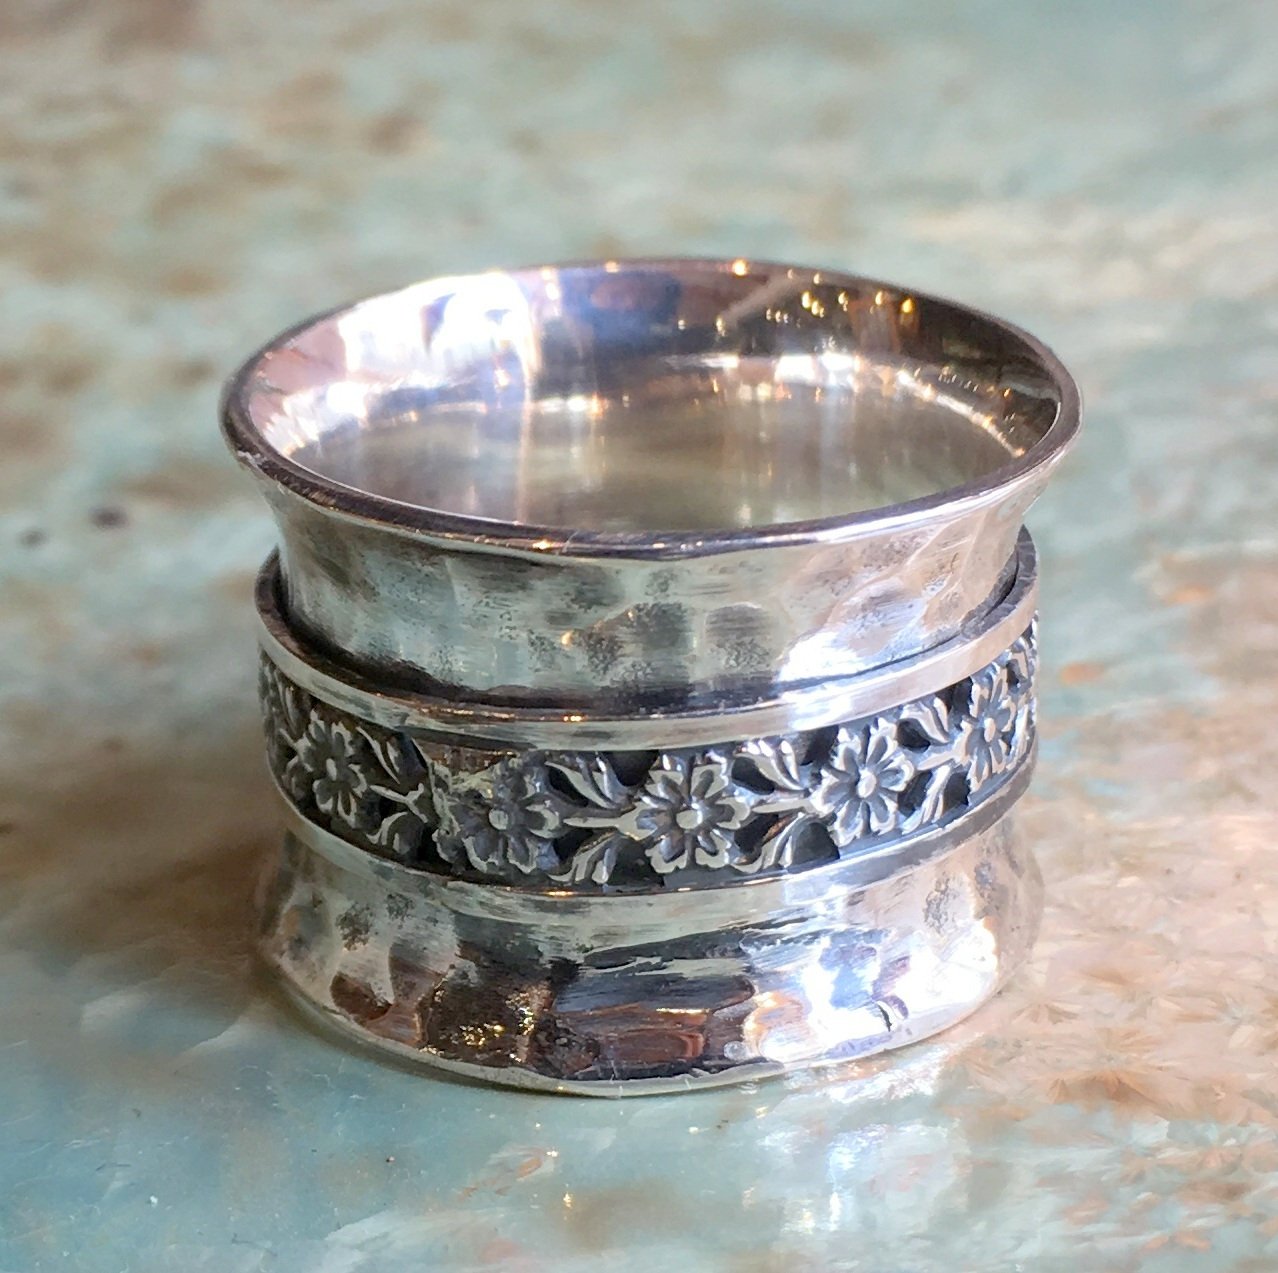 Spinner ring, Silver Wedding band, vine ring, meditation ring, wide silver band, flowers ring, hammered ring - Soul mates R2566